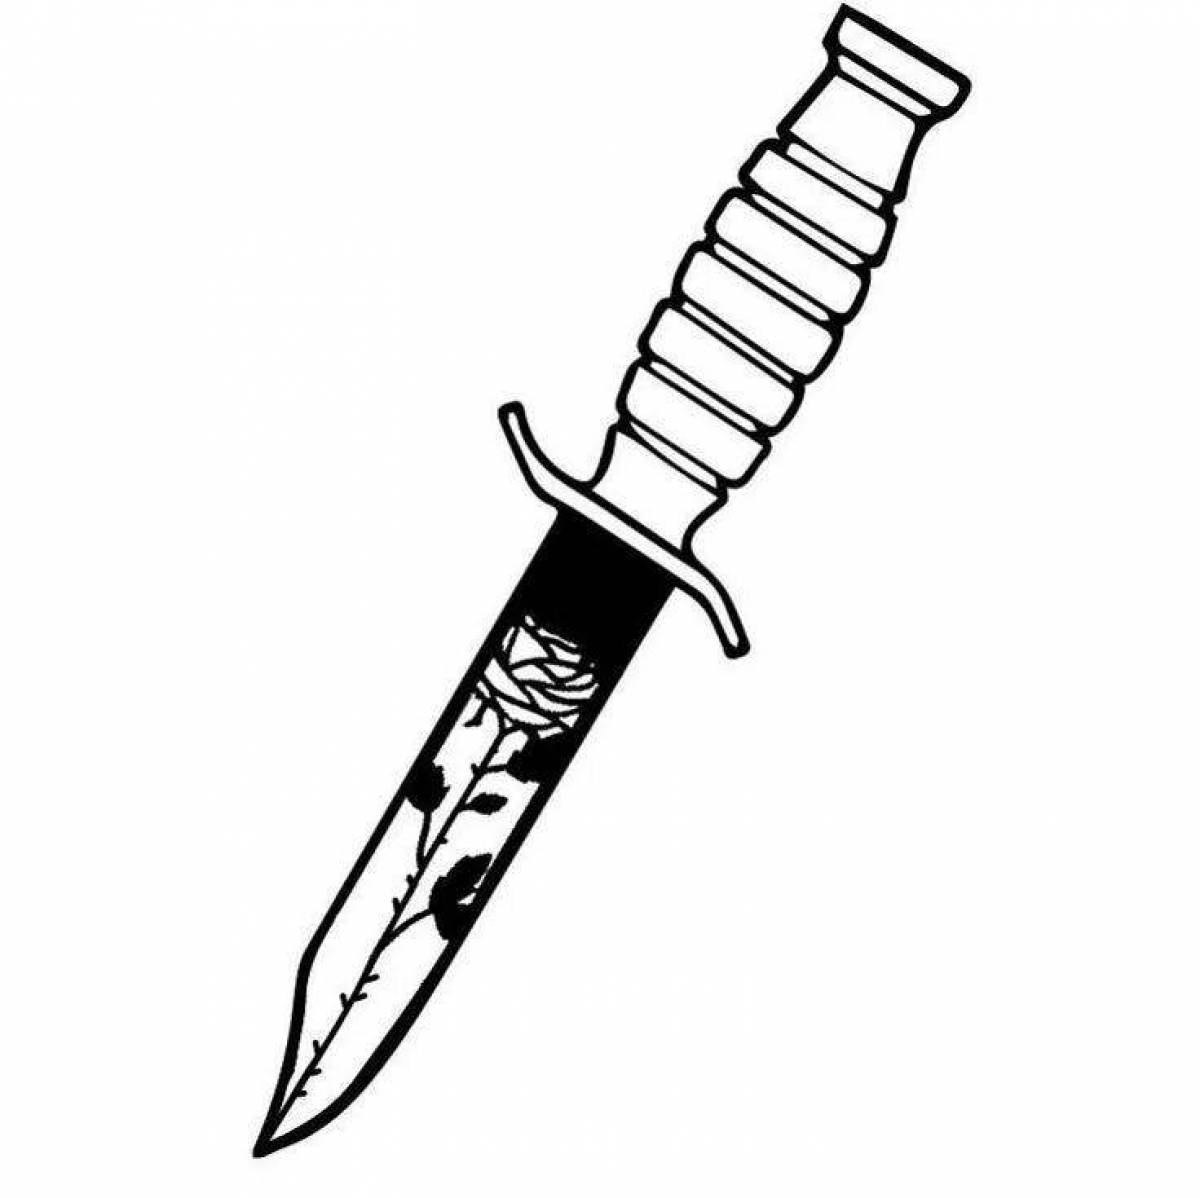 Coloring book exquisite bayonet